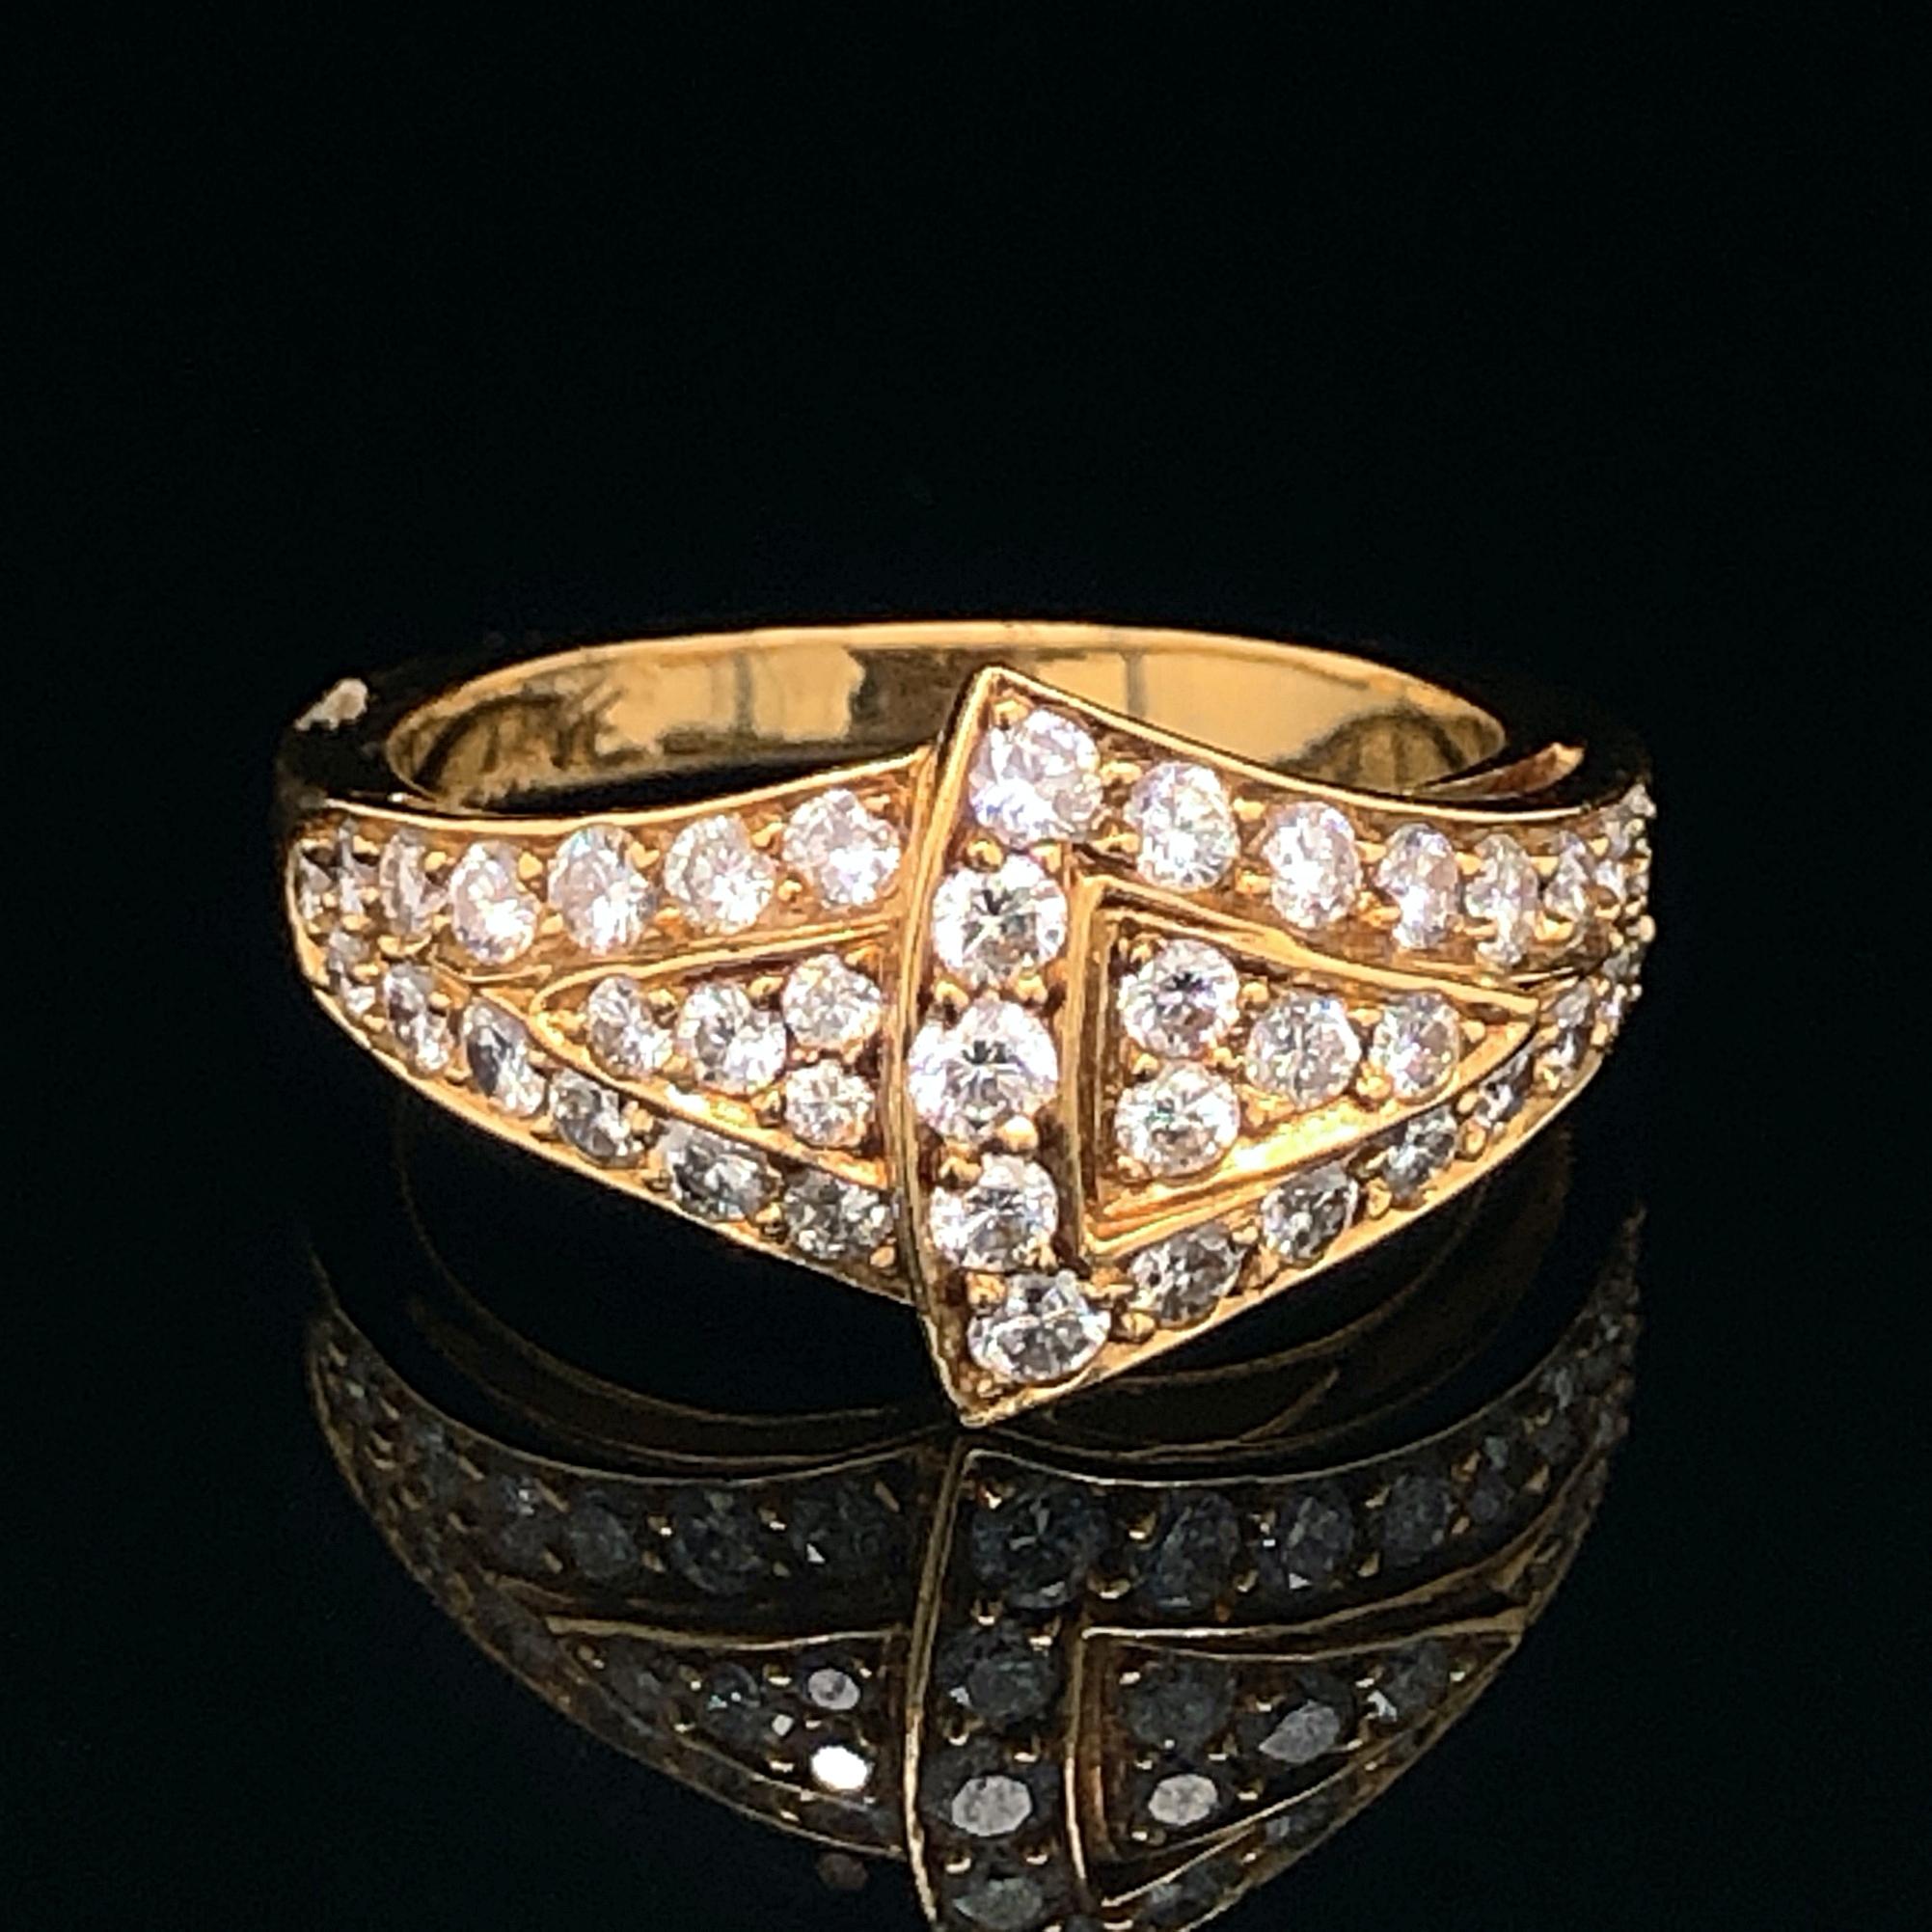 A diamond ring in 18k yellow gold, by Chaumet, France, 20th Century. The ring is set with round brilliant cut diamonds of very fine quality (E-F colour and VVS-IF clarity), weighing a total of approximately 1.2 carats.

The ring is signed Chaumet